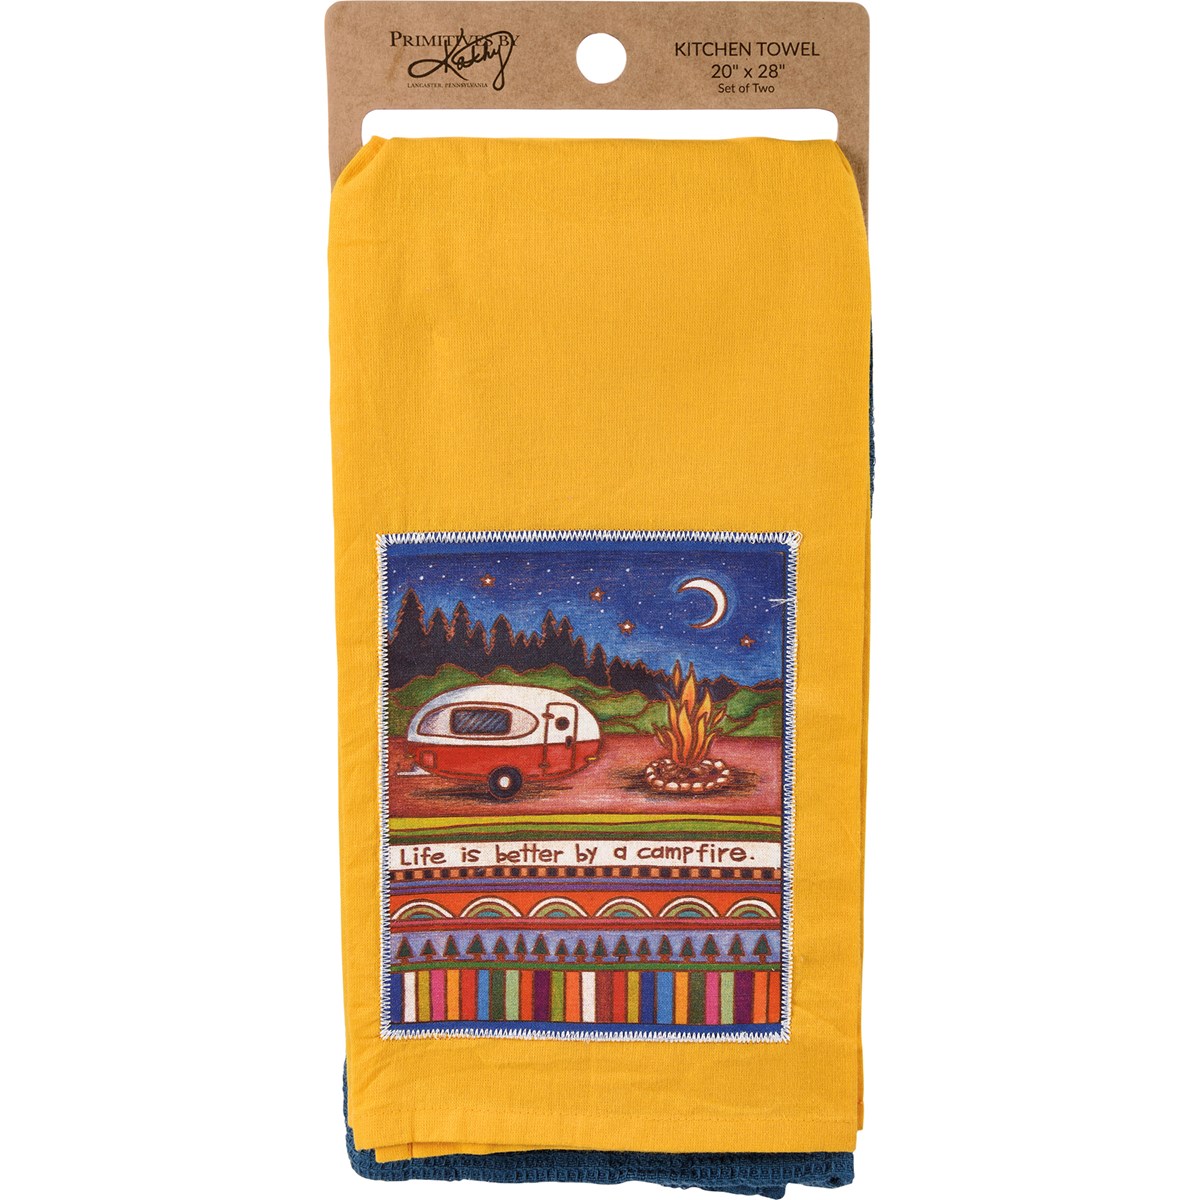 Kitchen Towel Set - Life Is Better By A Campfire - 20" x 28" - Cotton